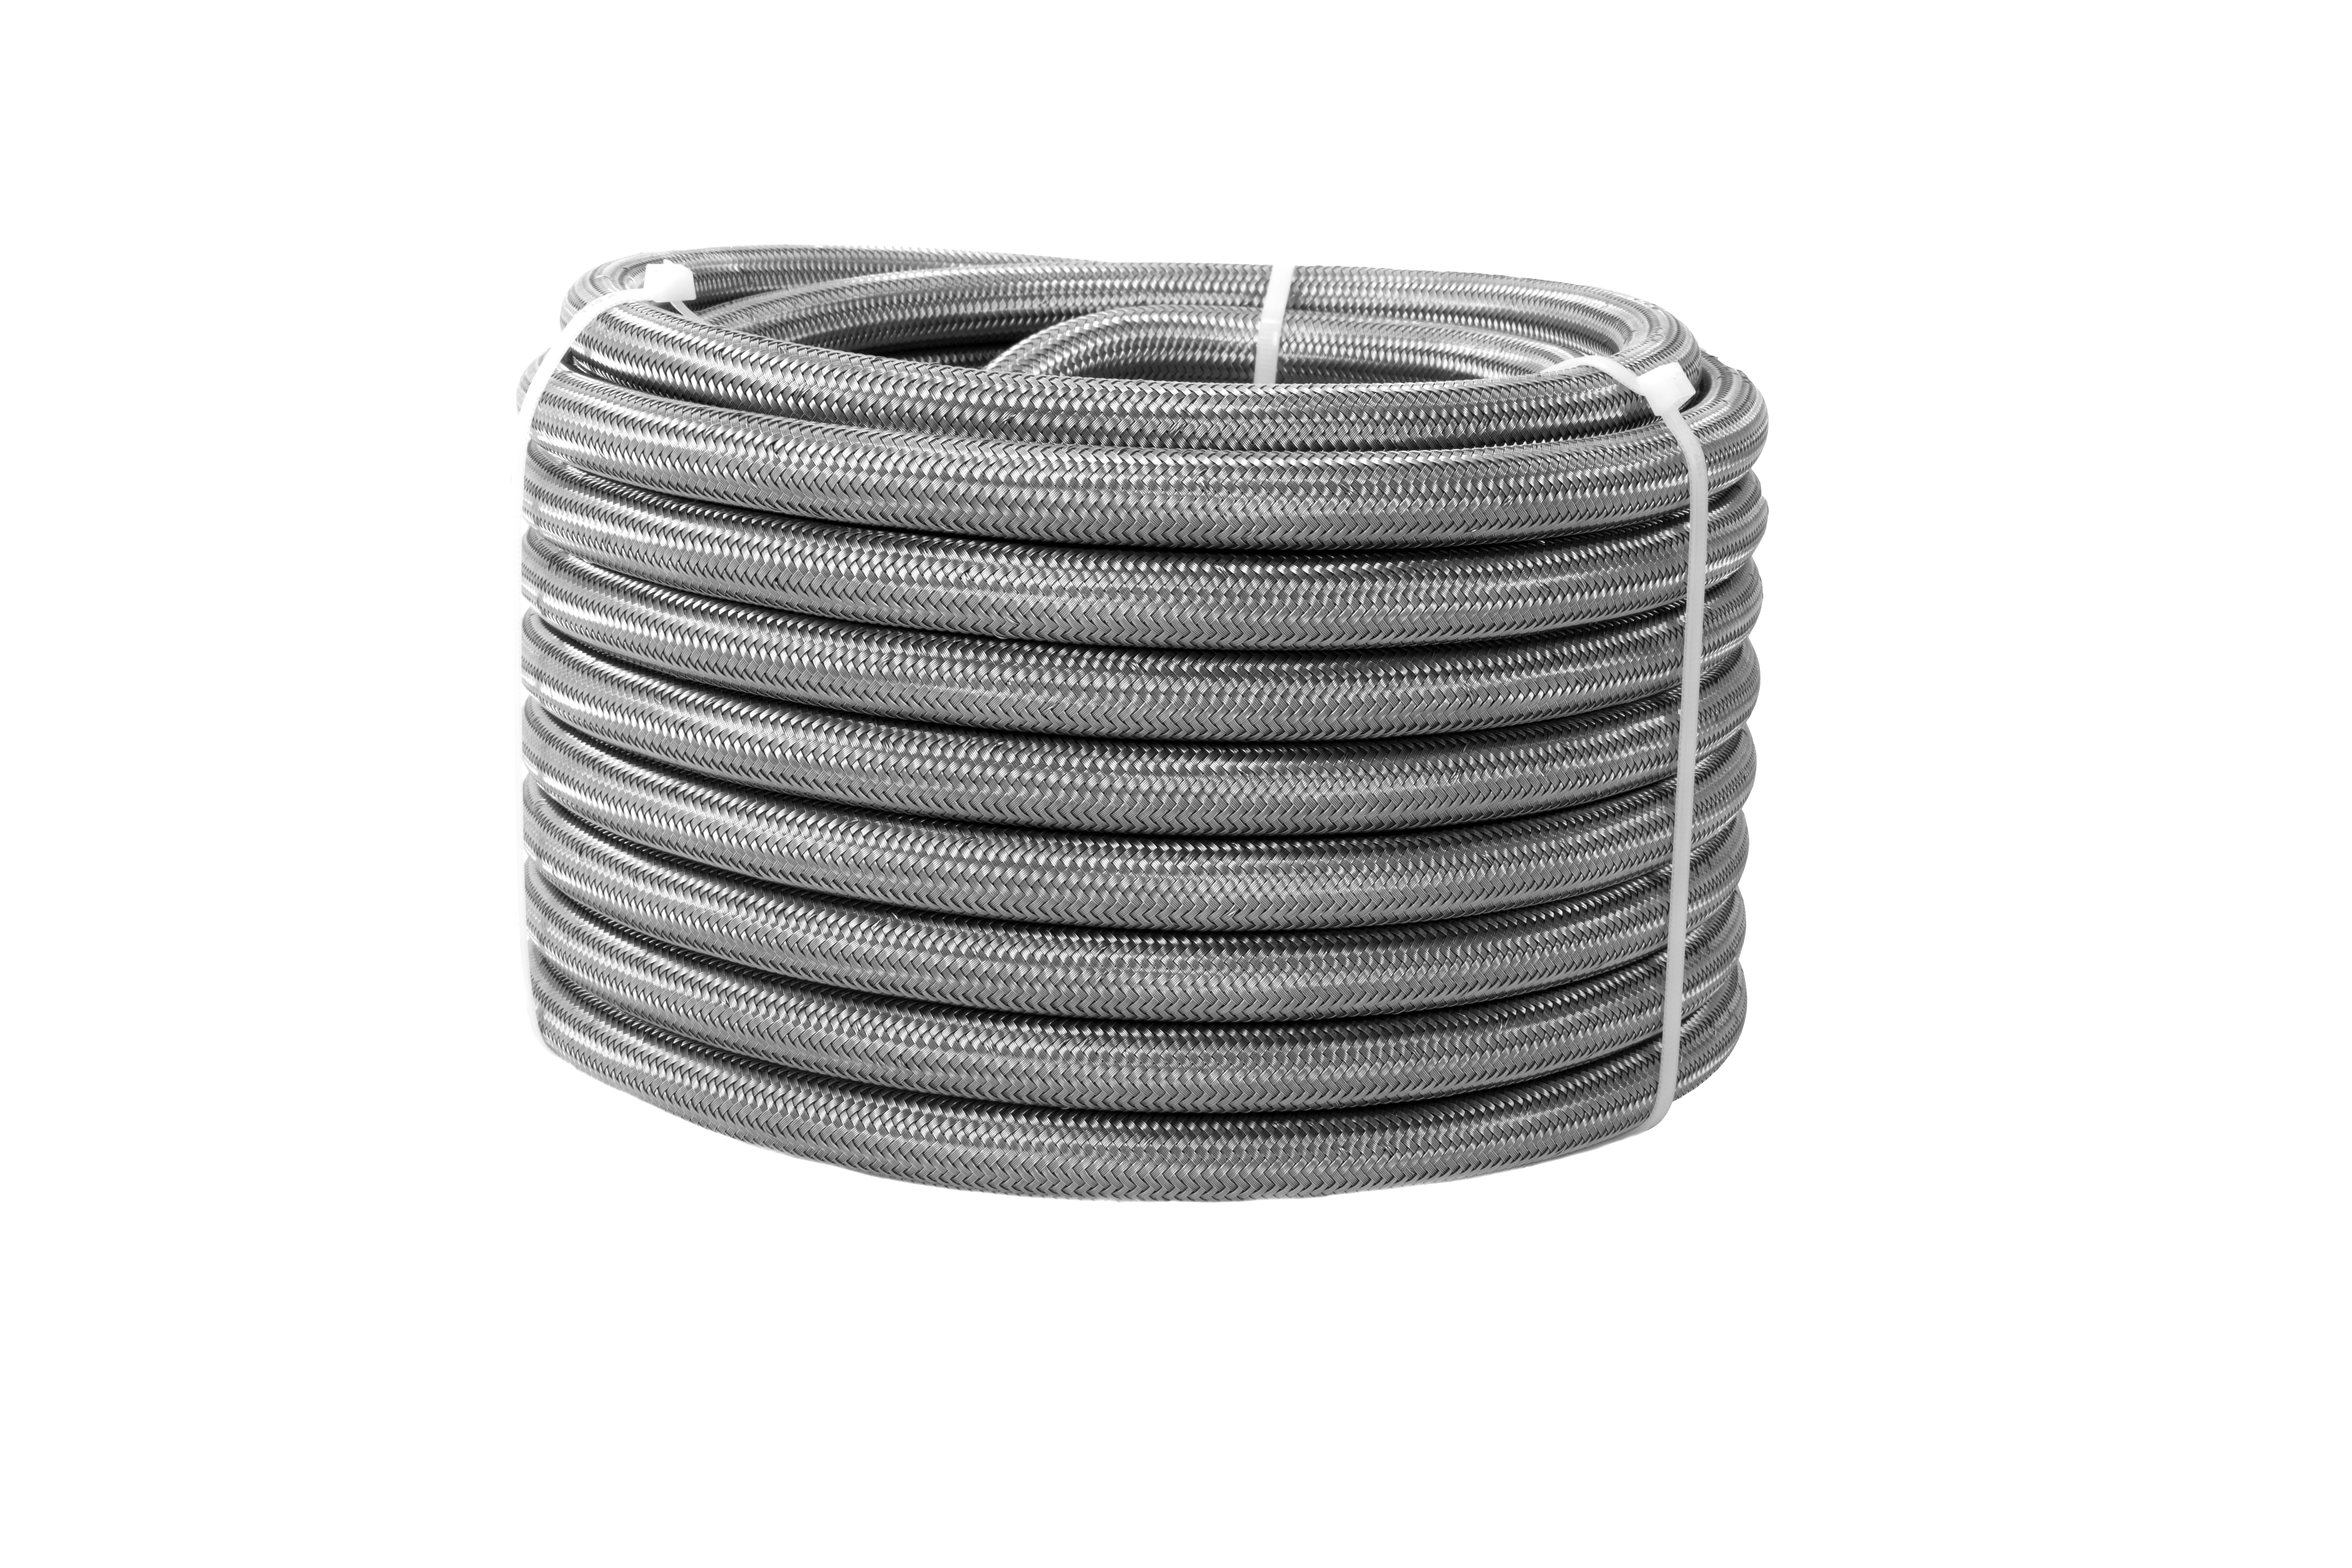 Aeromotive 15319 Hose, 12 AN, 16 ft, Braided Stainless / PTFE, Natural, Each